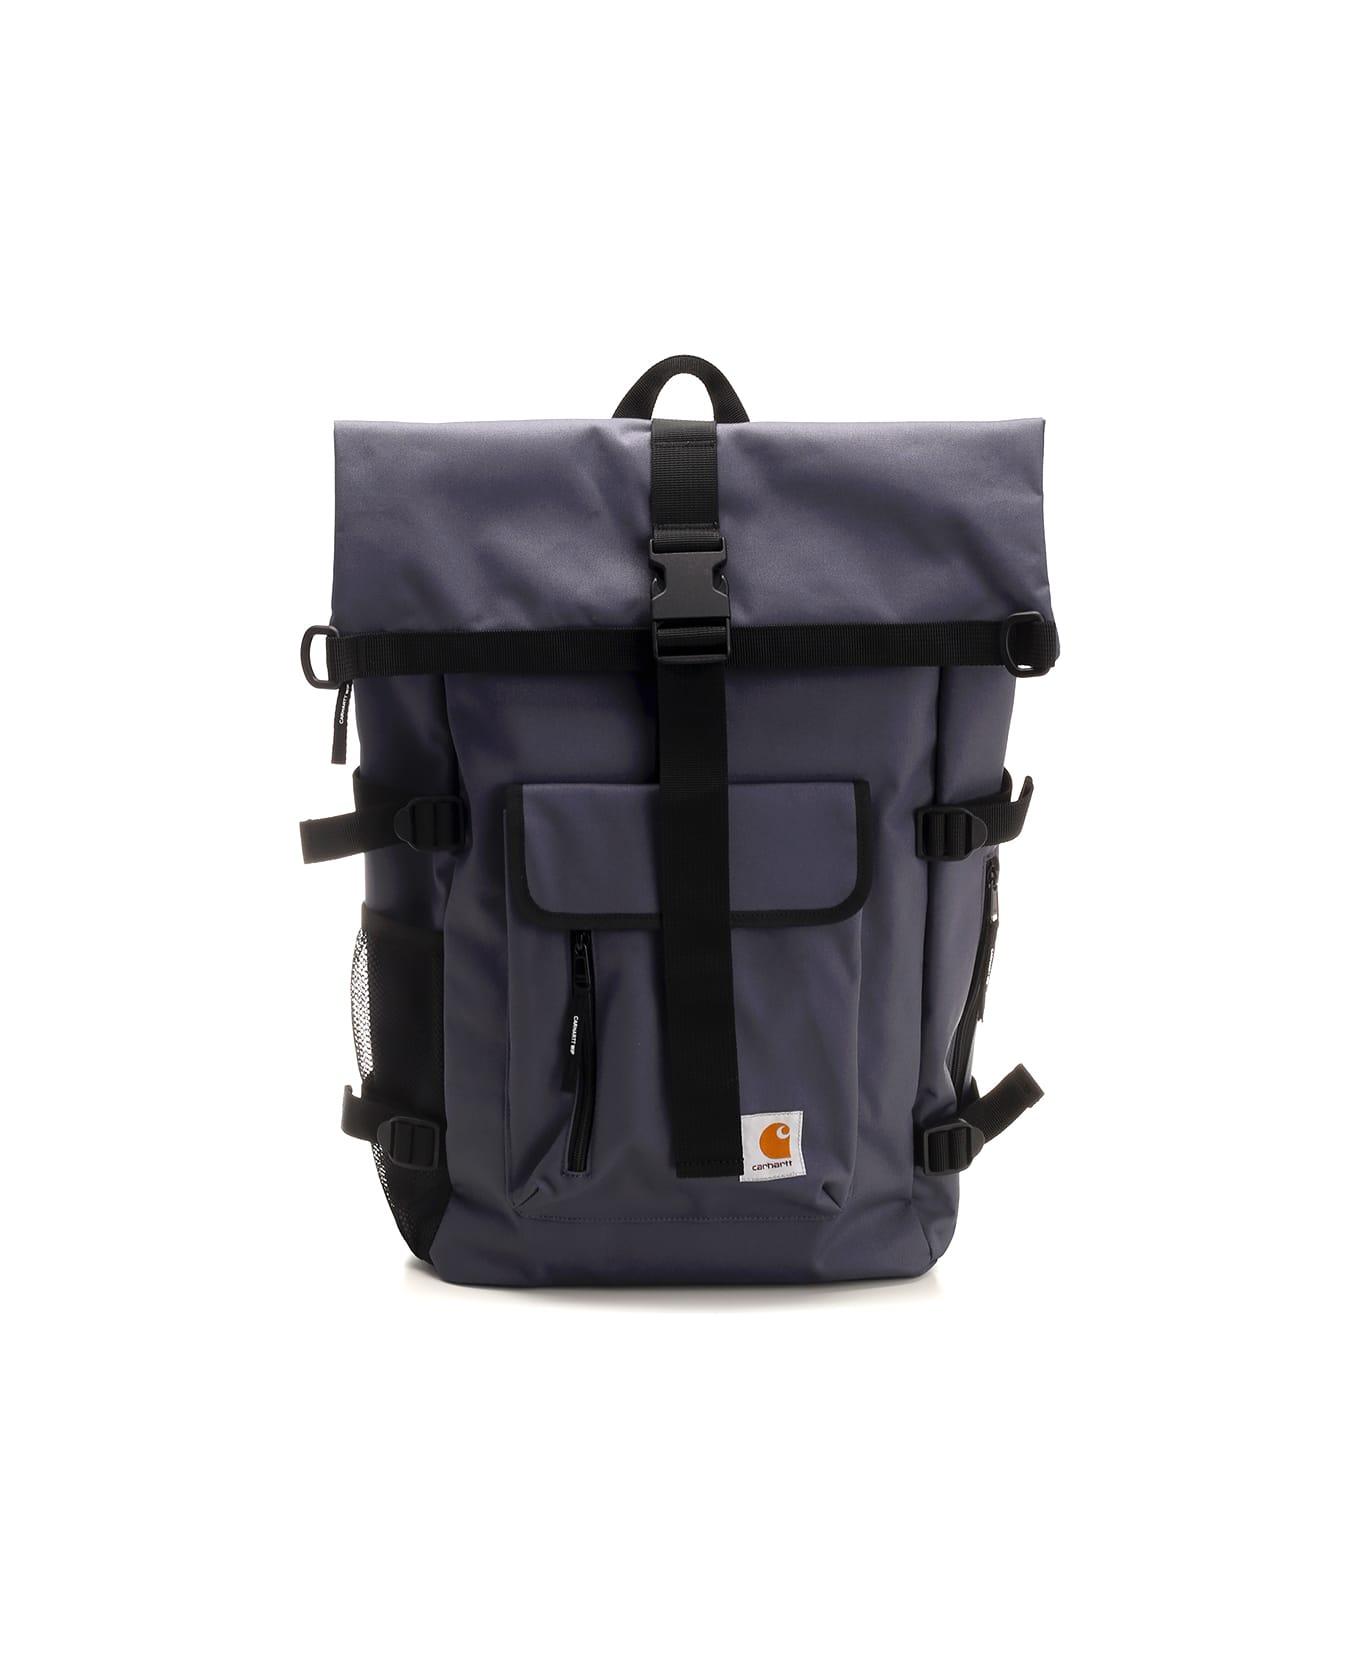 Carhartt Anthracite Grey 'philis' Backpack - Grigio バックパック